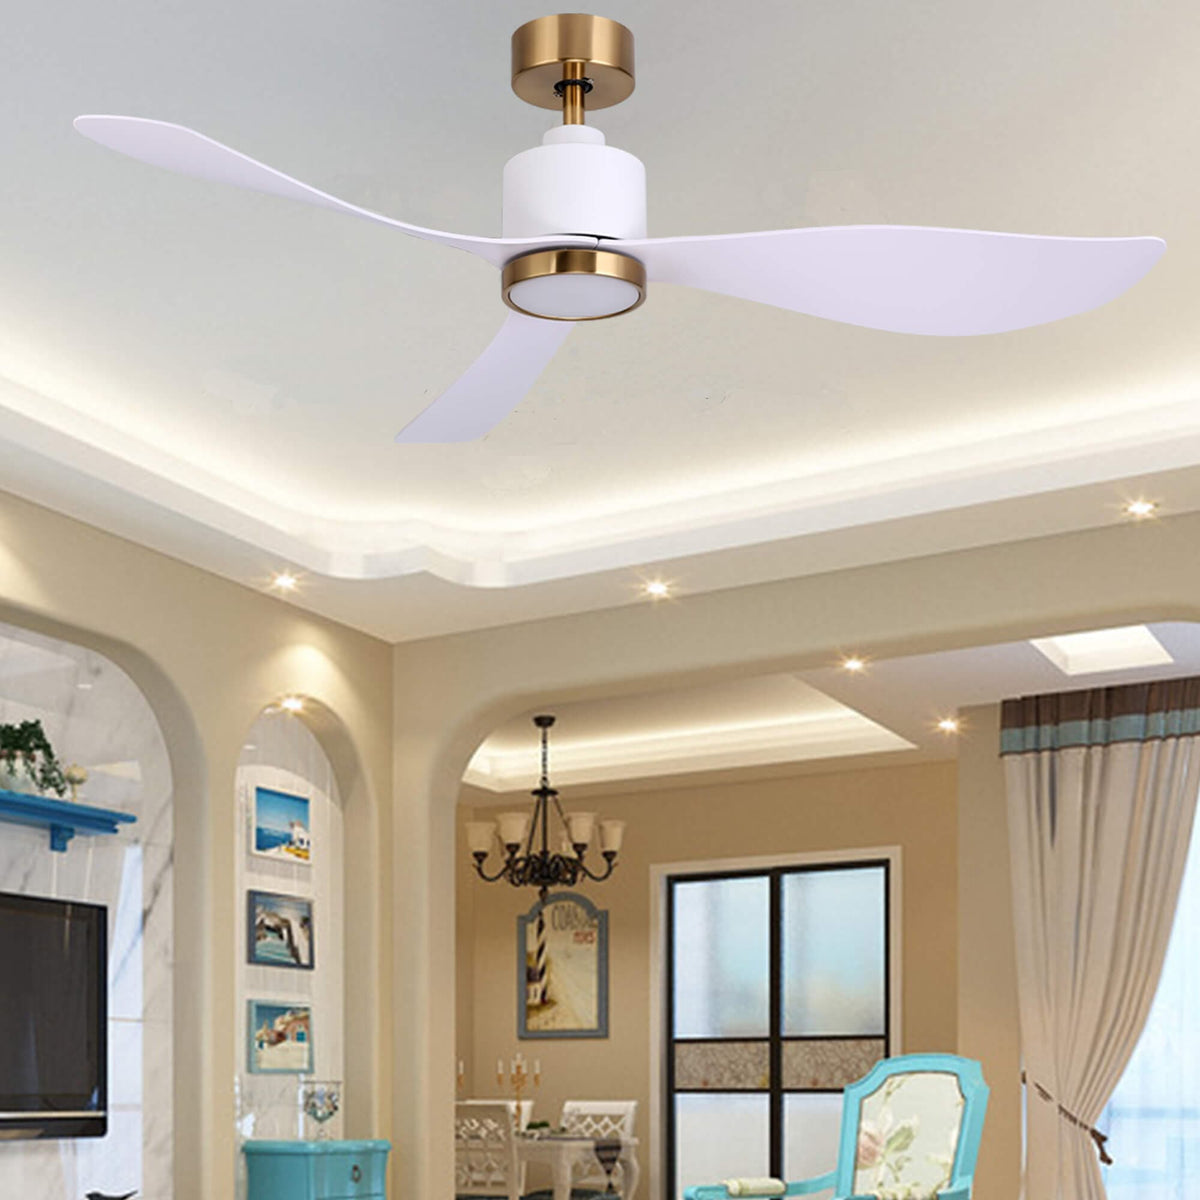 Ovios 52‘’ Ceiling Fan Reversible 3 Blades with Remote Control Lights, DC Motor, White